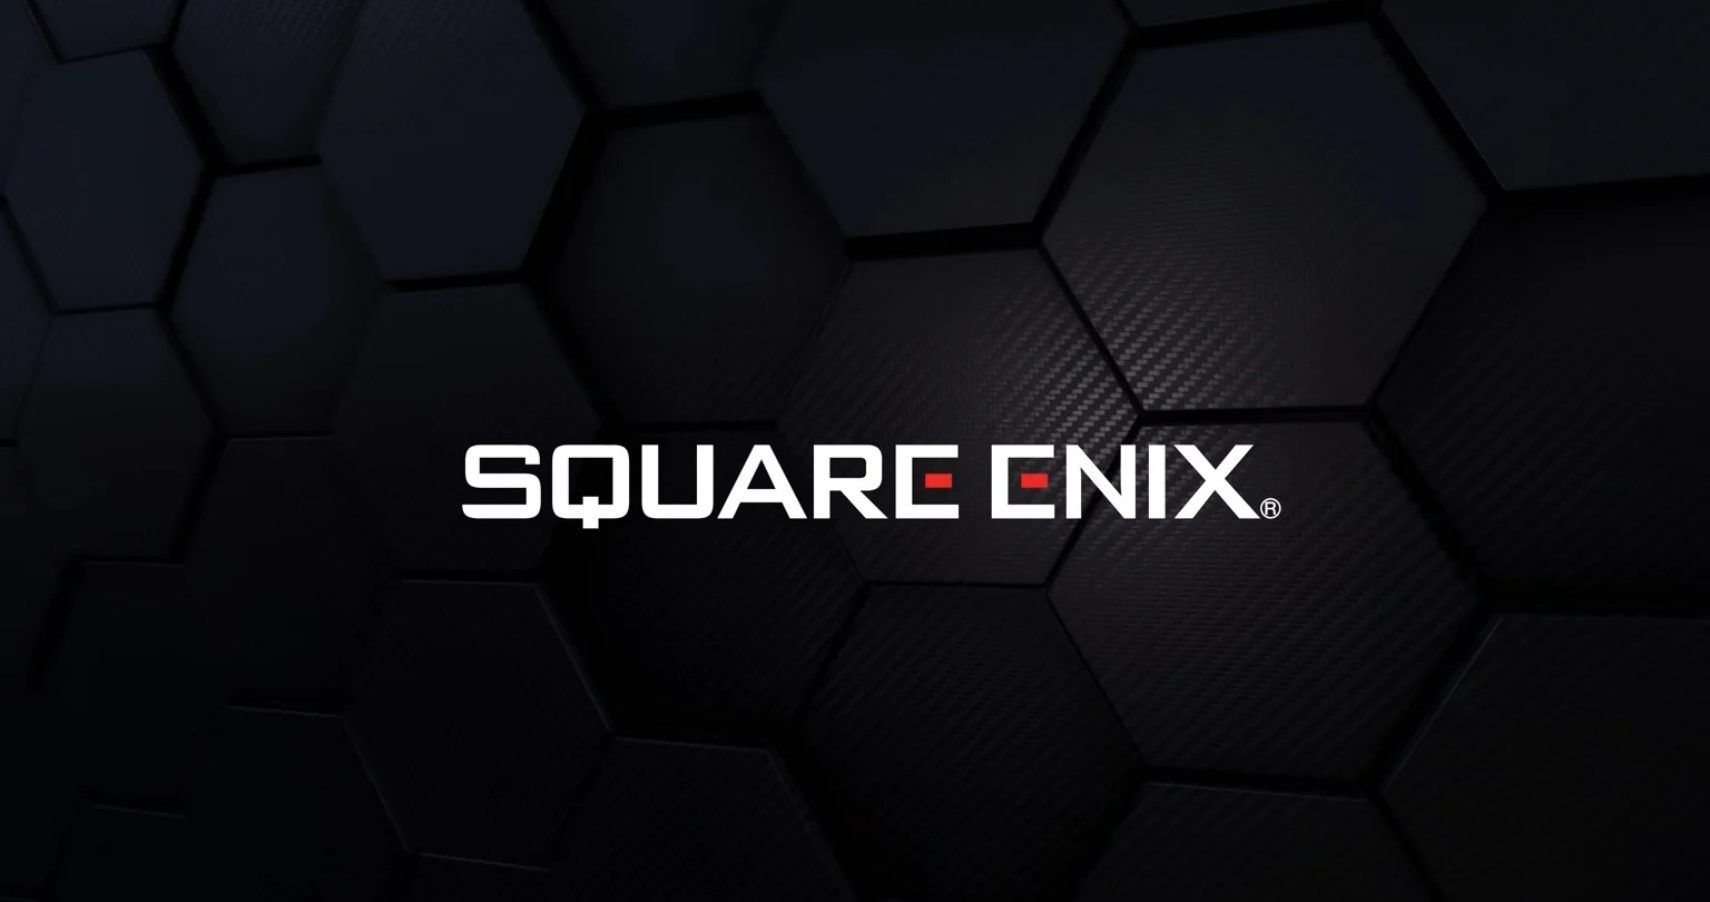 Square Enix Confirms “Several” New Titles Will Be Revealed In July & August